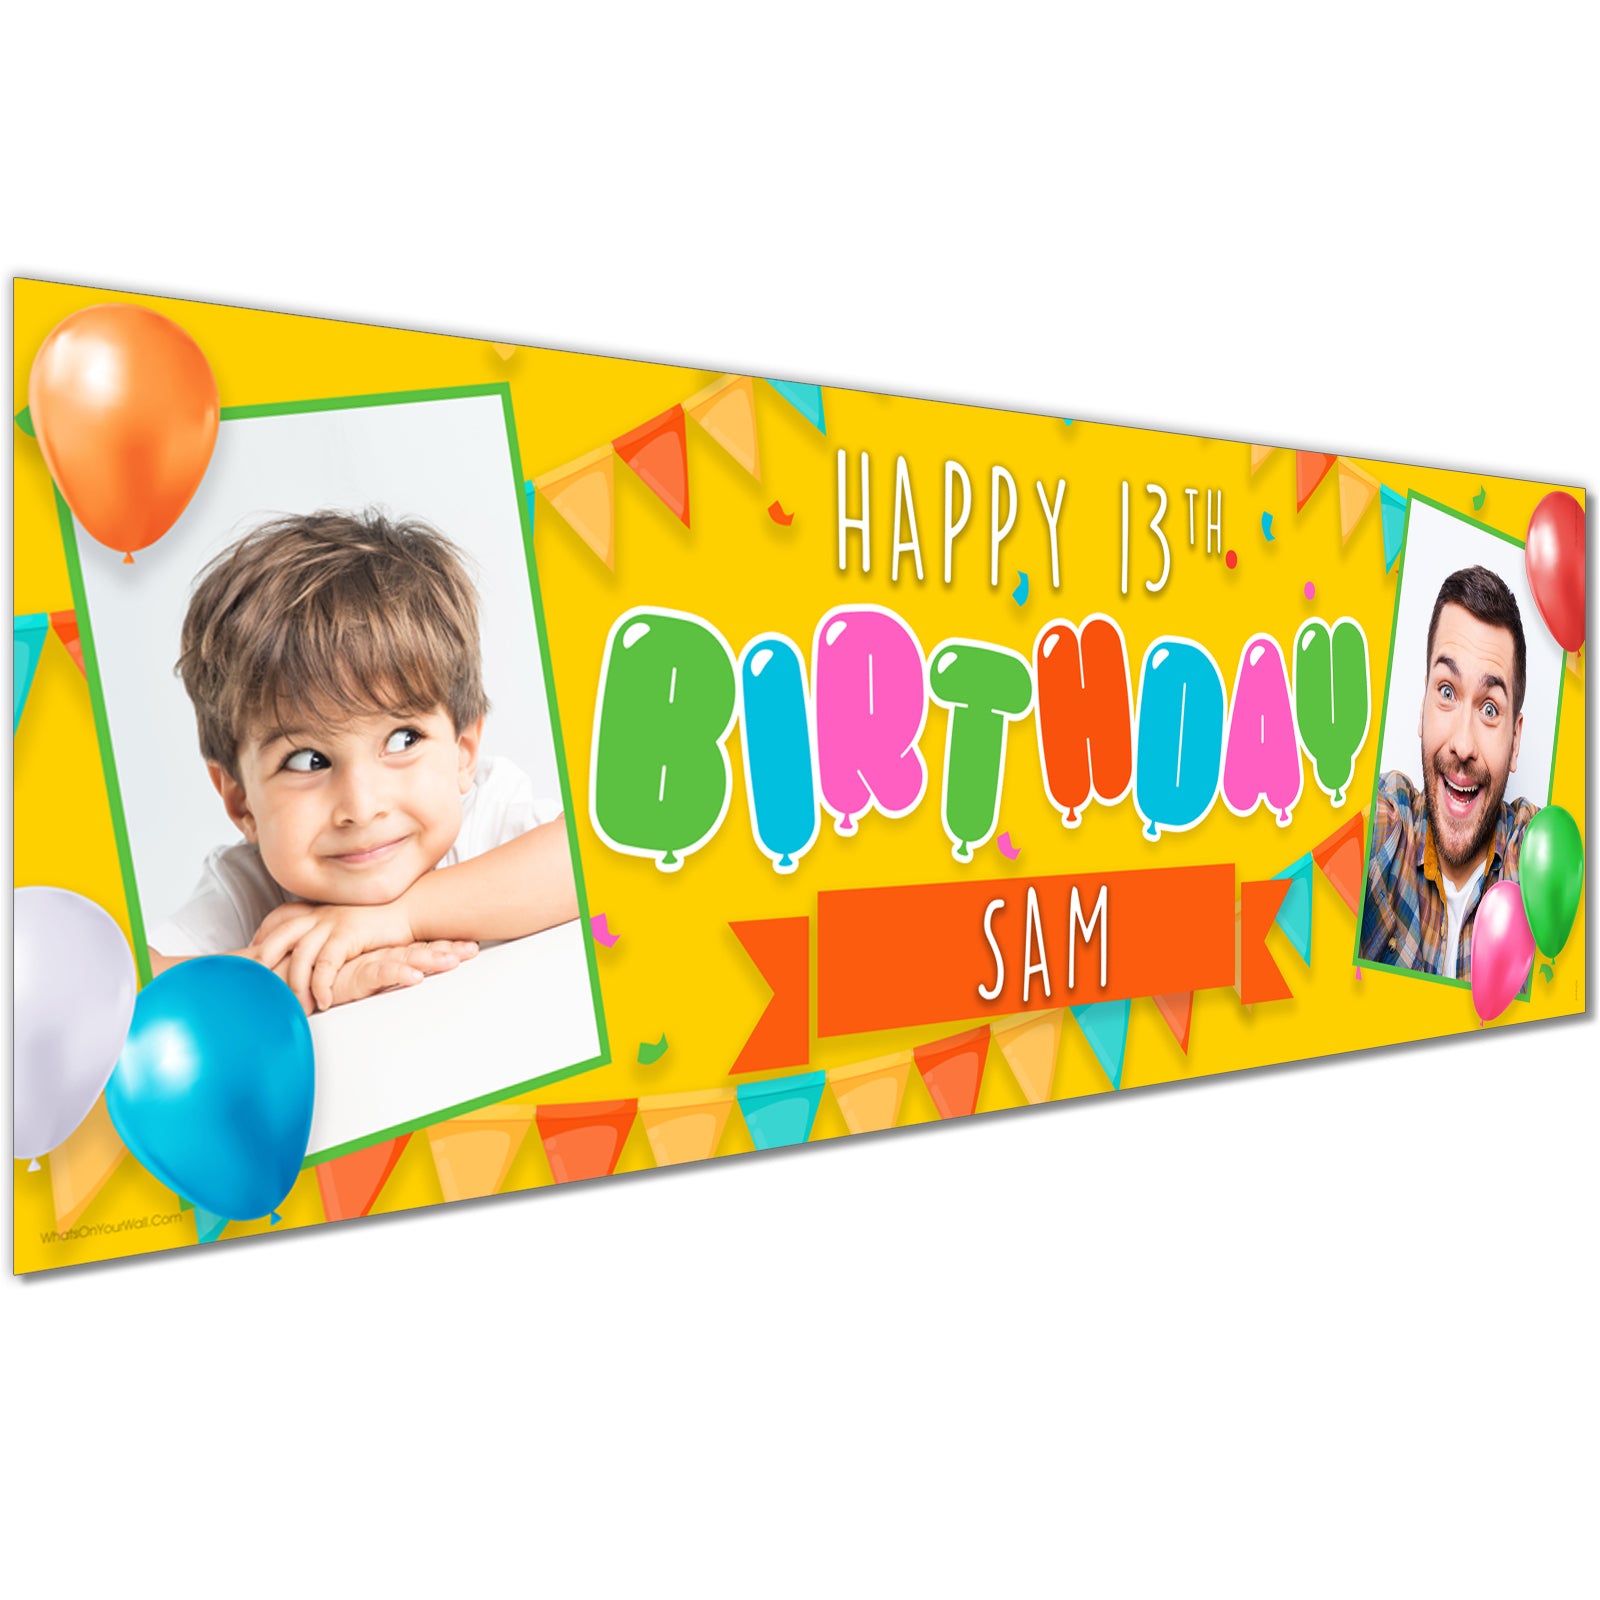 Personalised Birthday Banners in Party Colours Design